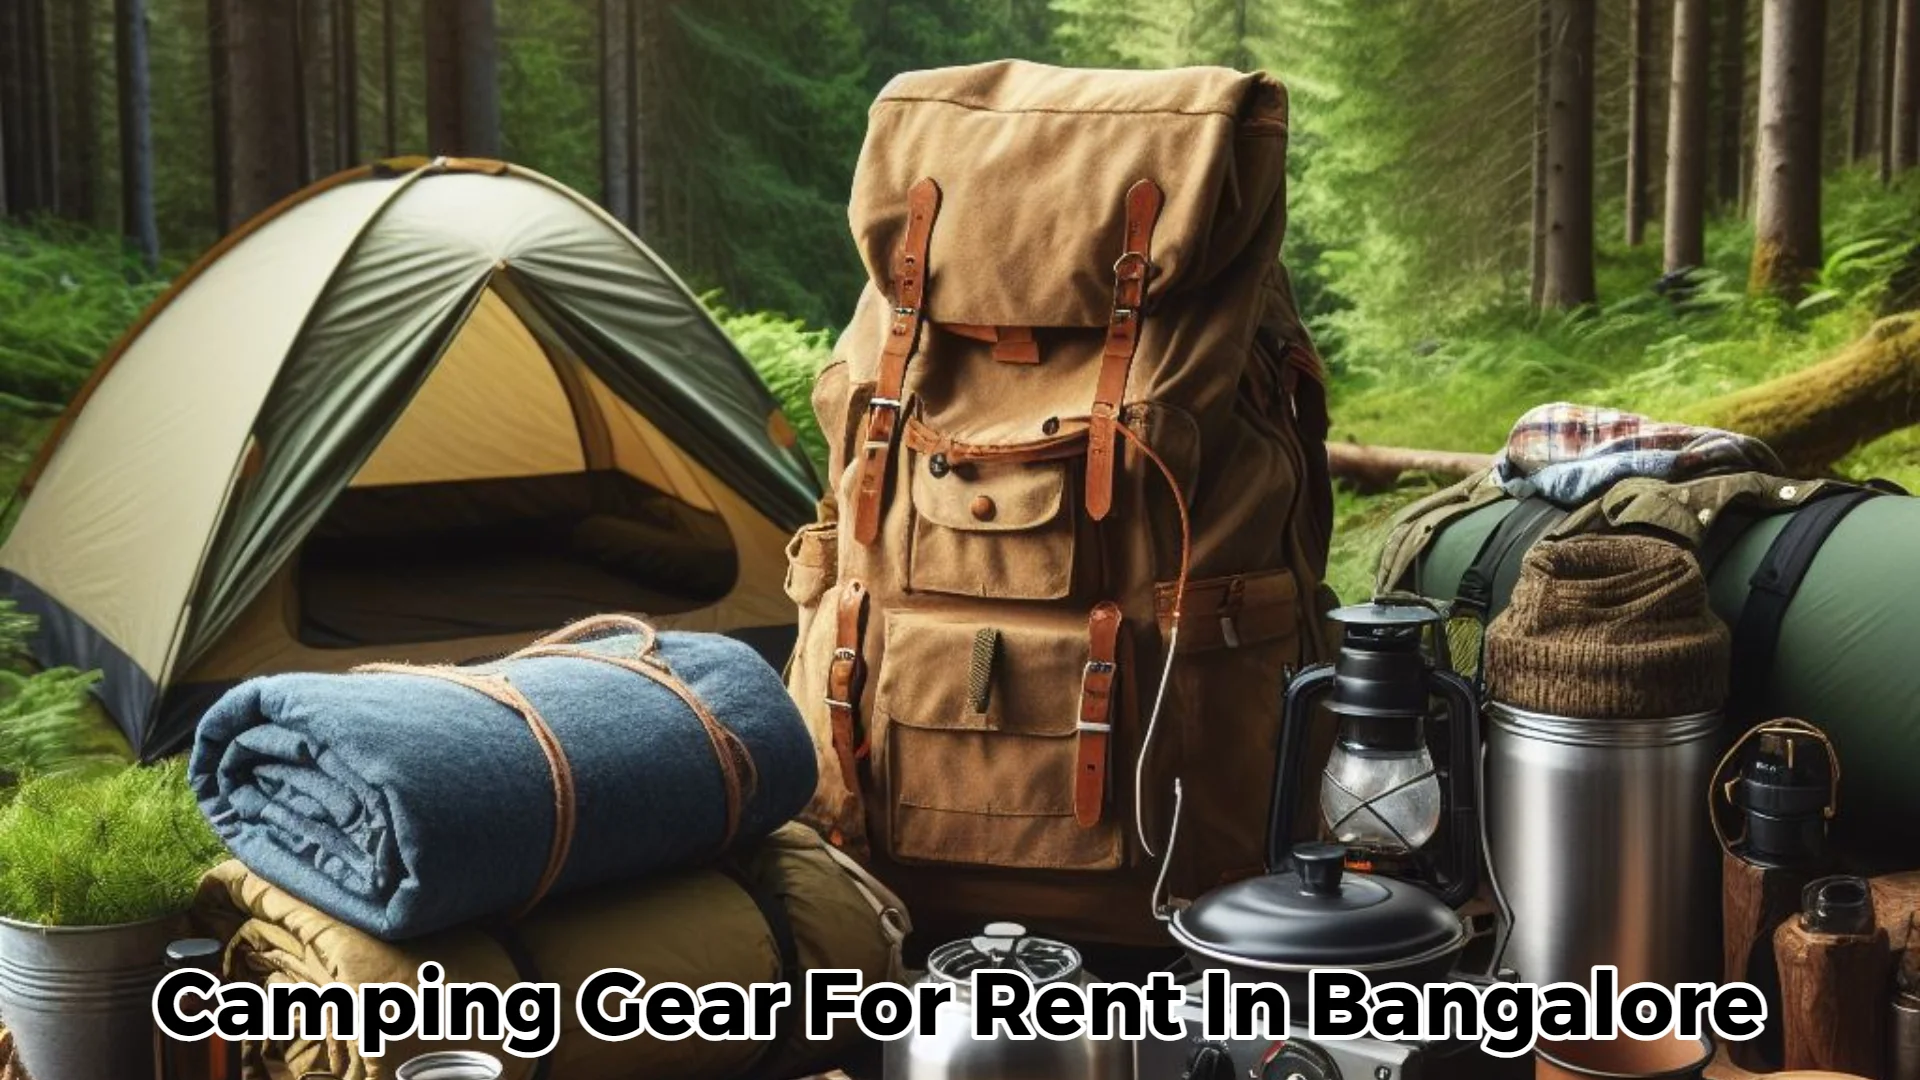 Camping Gear for Rent in Bangalore at lowest price - Outdoor Gear